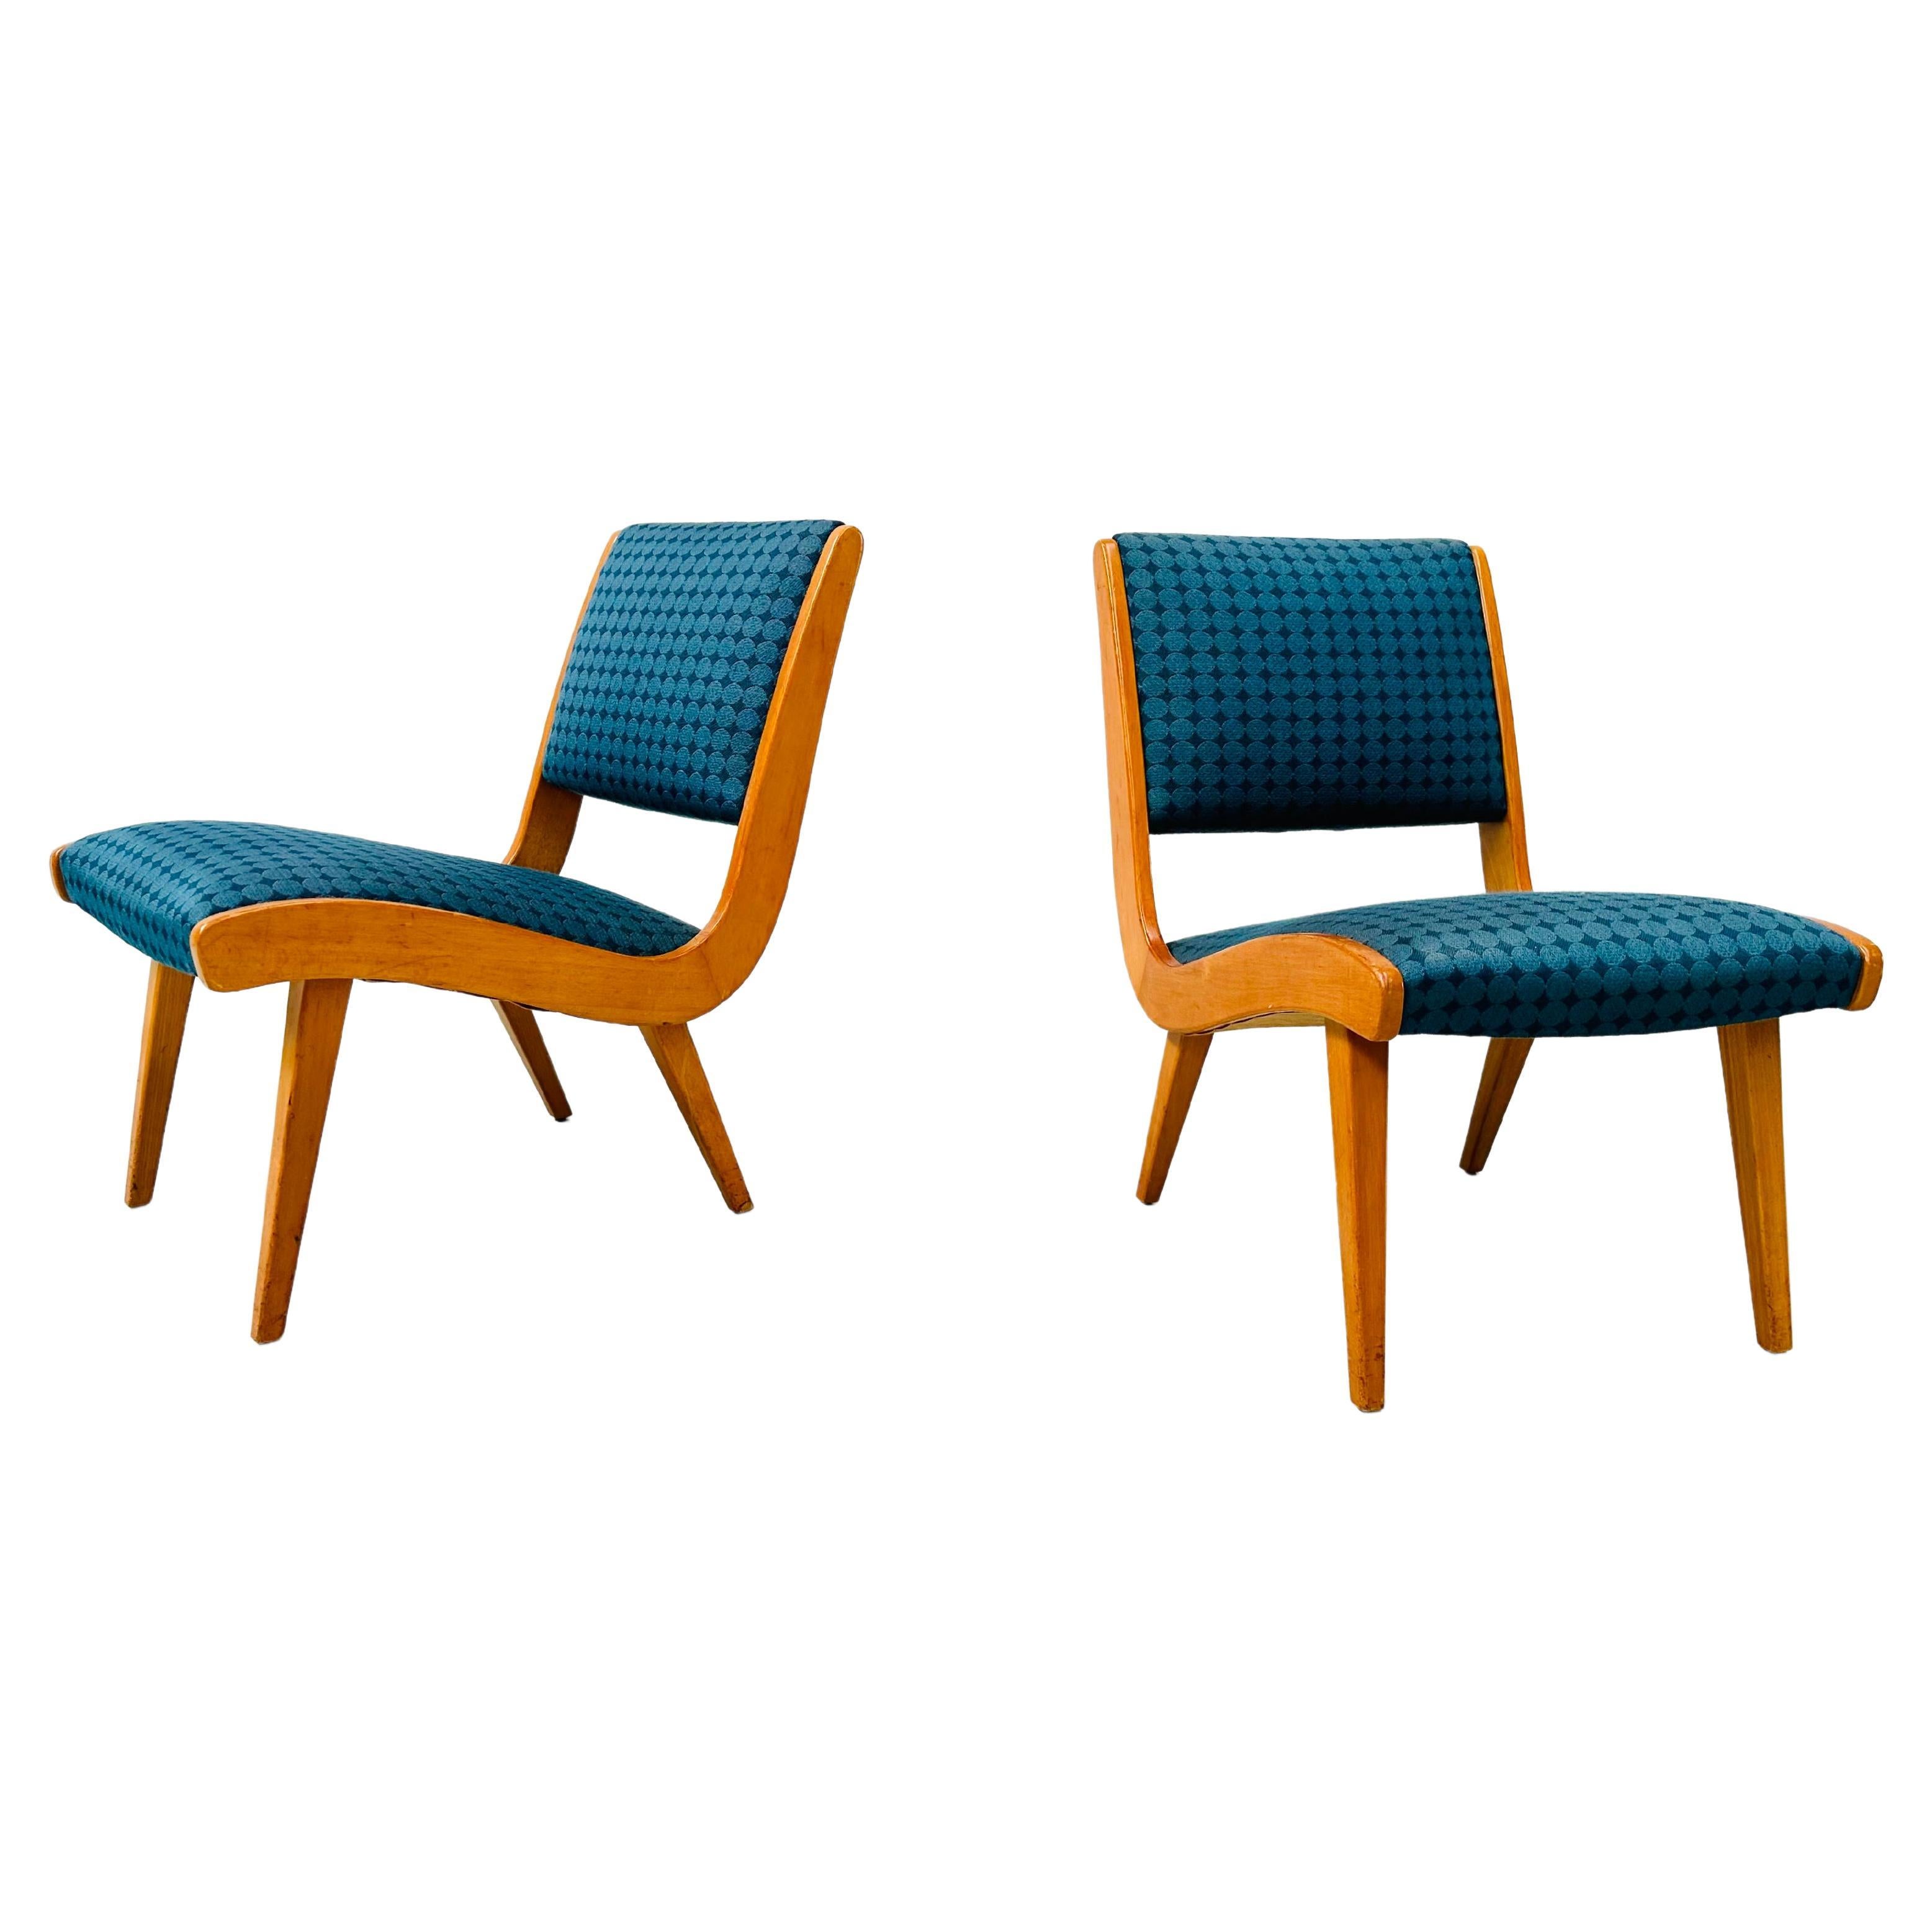 1950s Rare Set Vostra Chairs Numbered & Original Fabric by Jens Risom for Knoll. en vente